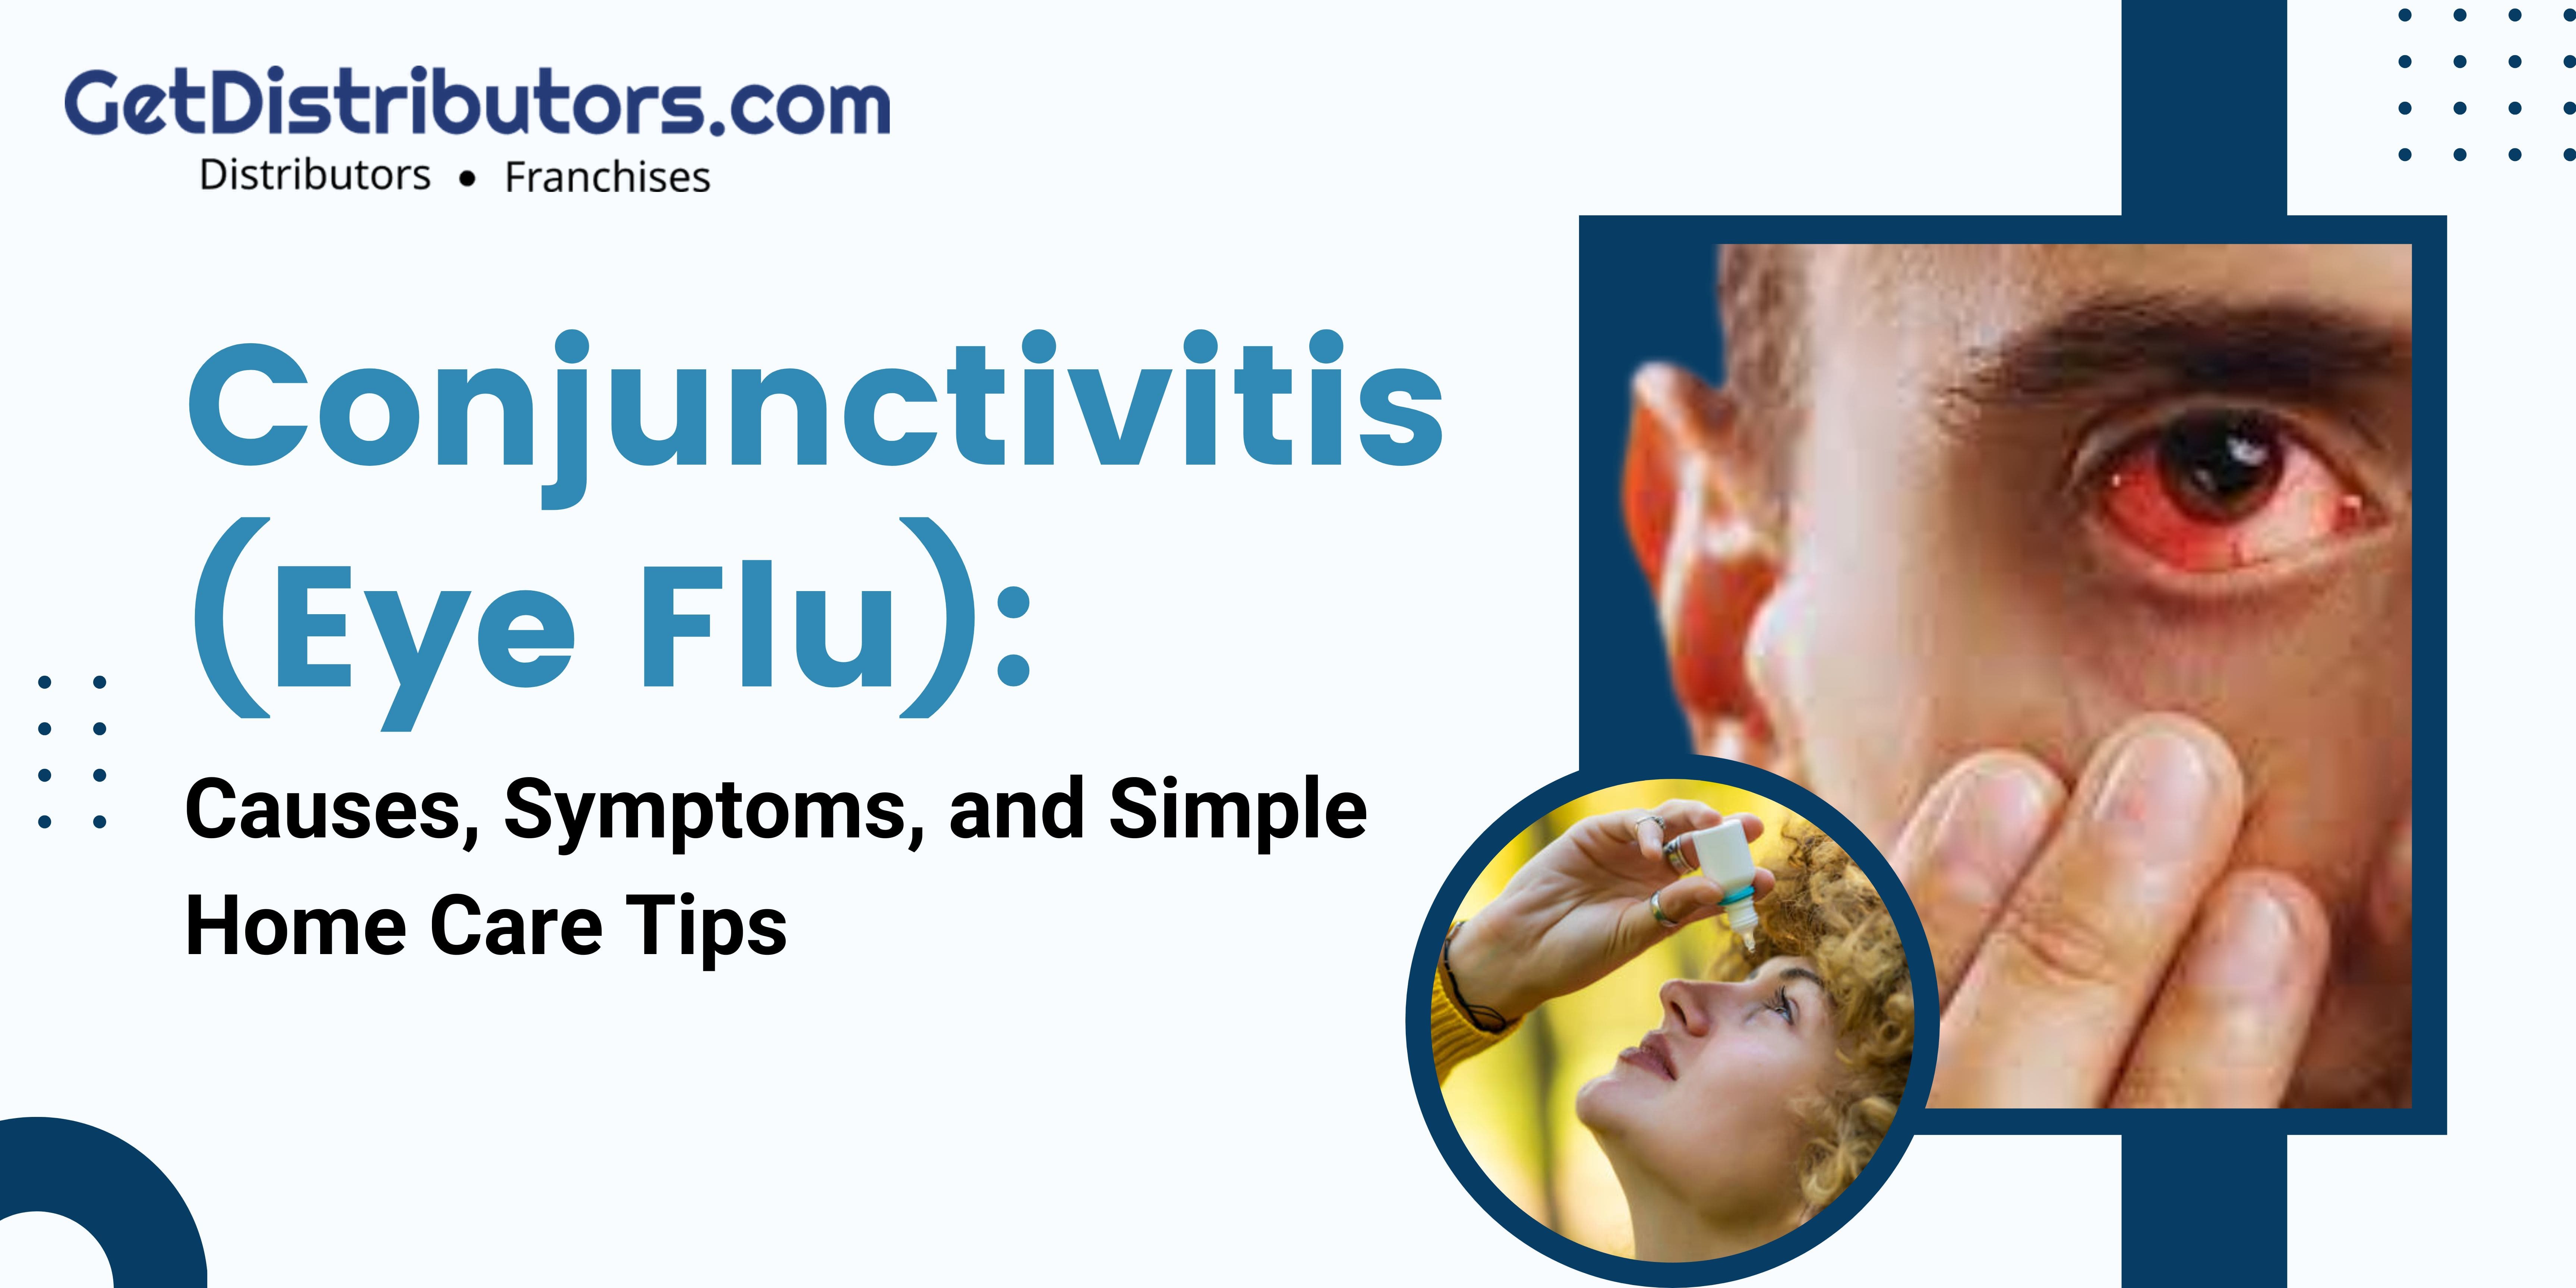 Conjunctivitis (Eye Flu): Causes, Symptoms, and Simple Home Care Tips